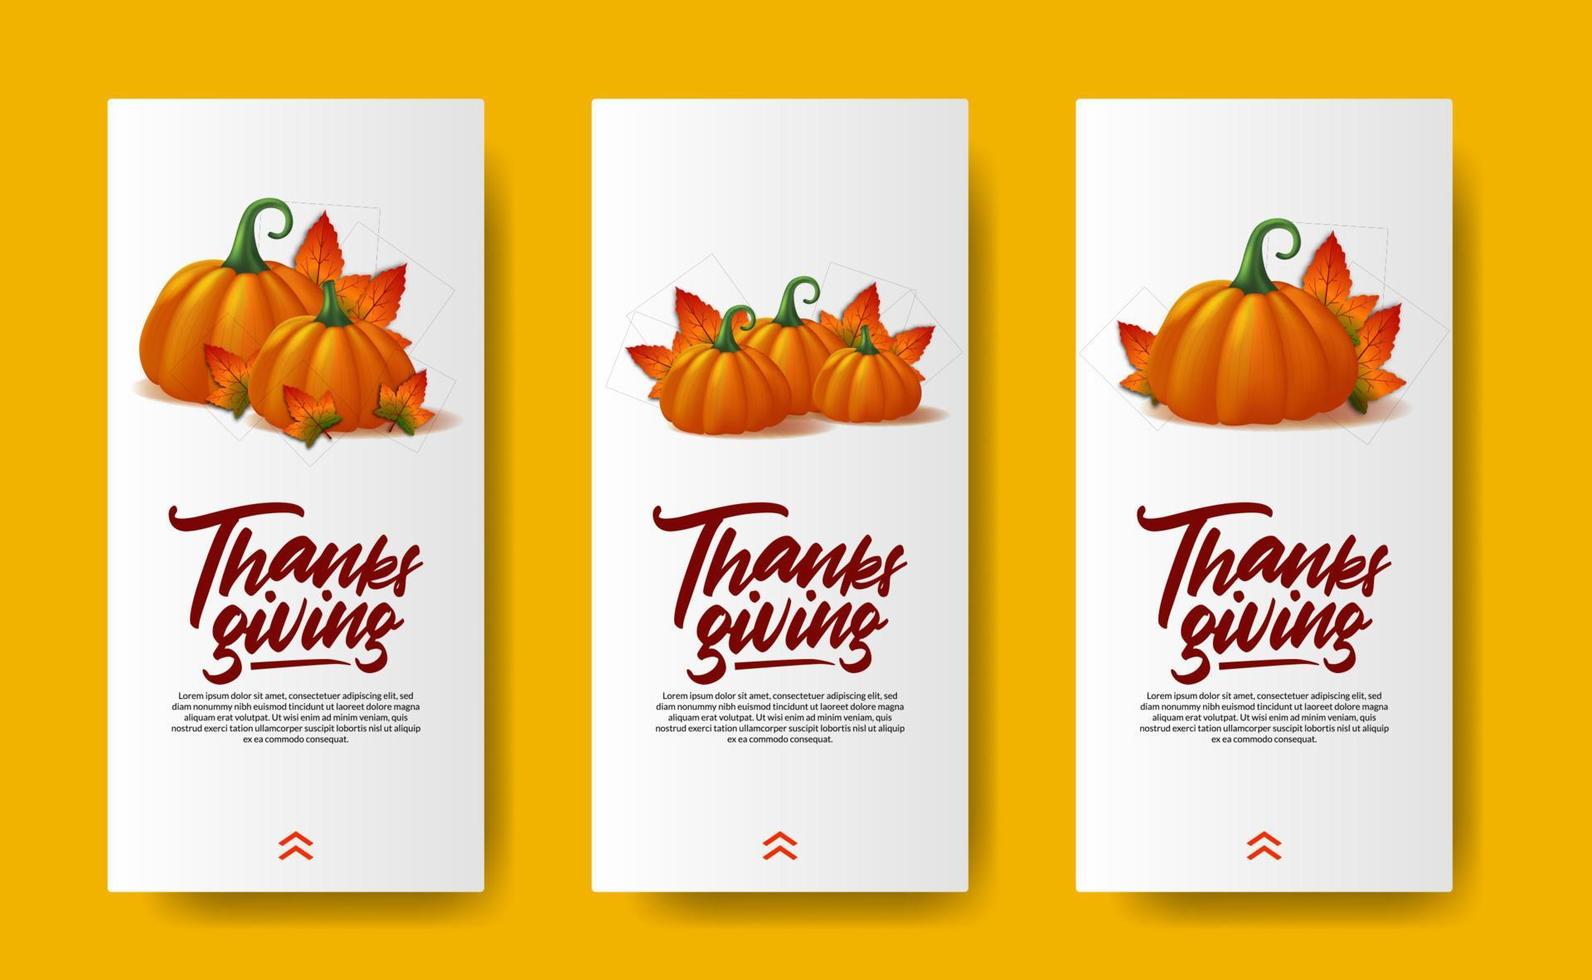 Thanskgiving realistic pumpkin vegetable social media stories template autumn fall maple leaves vector